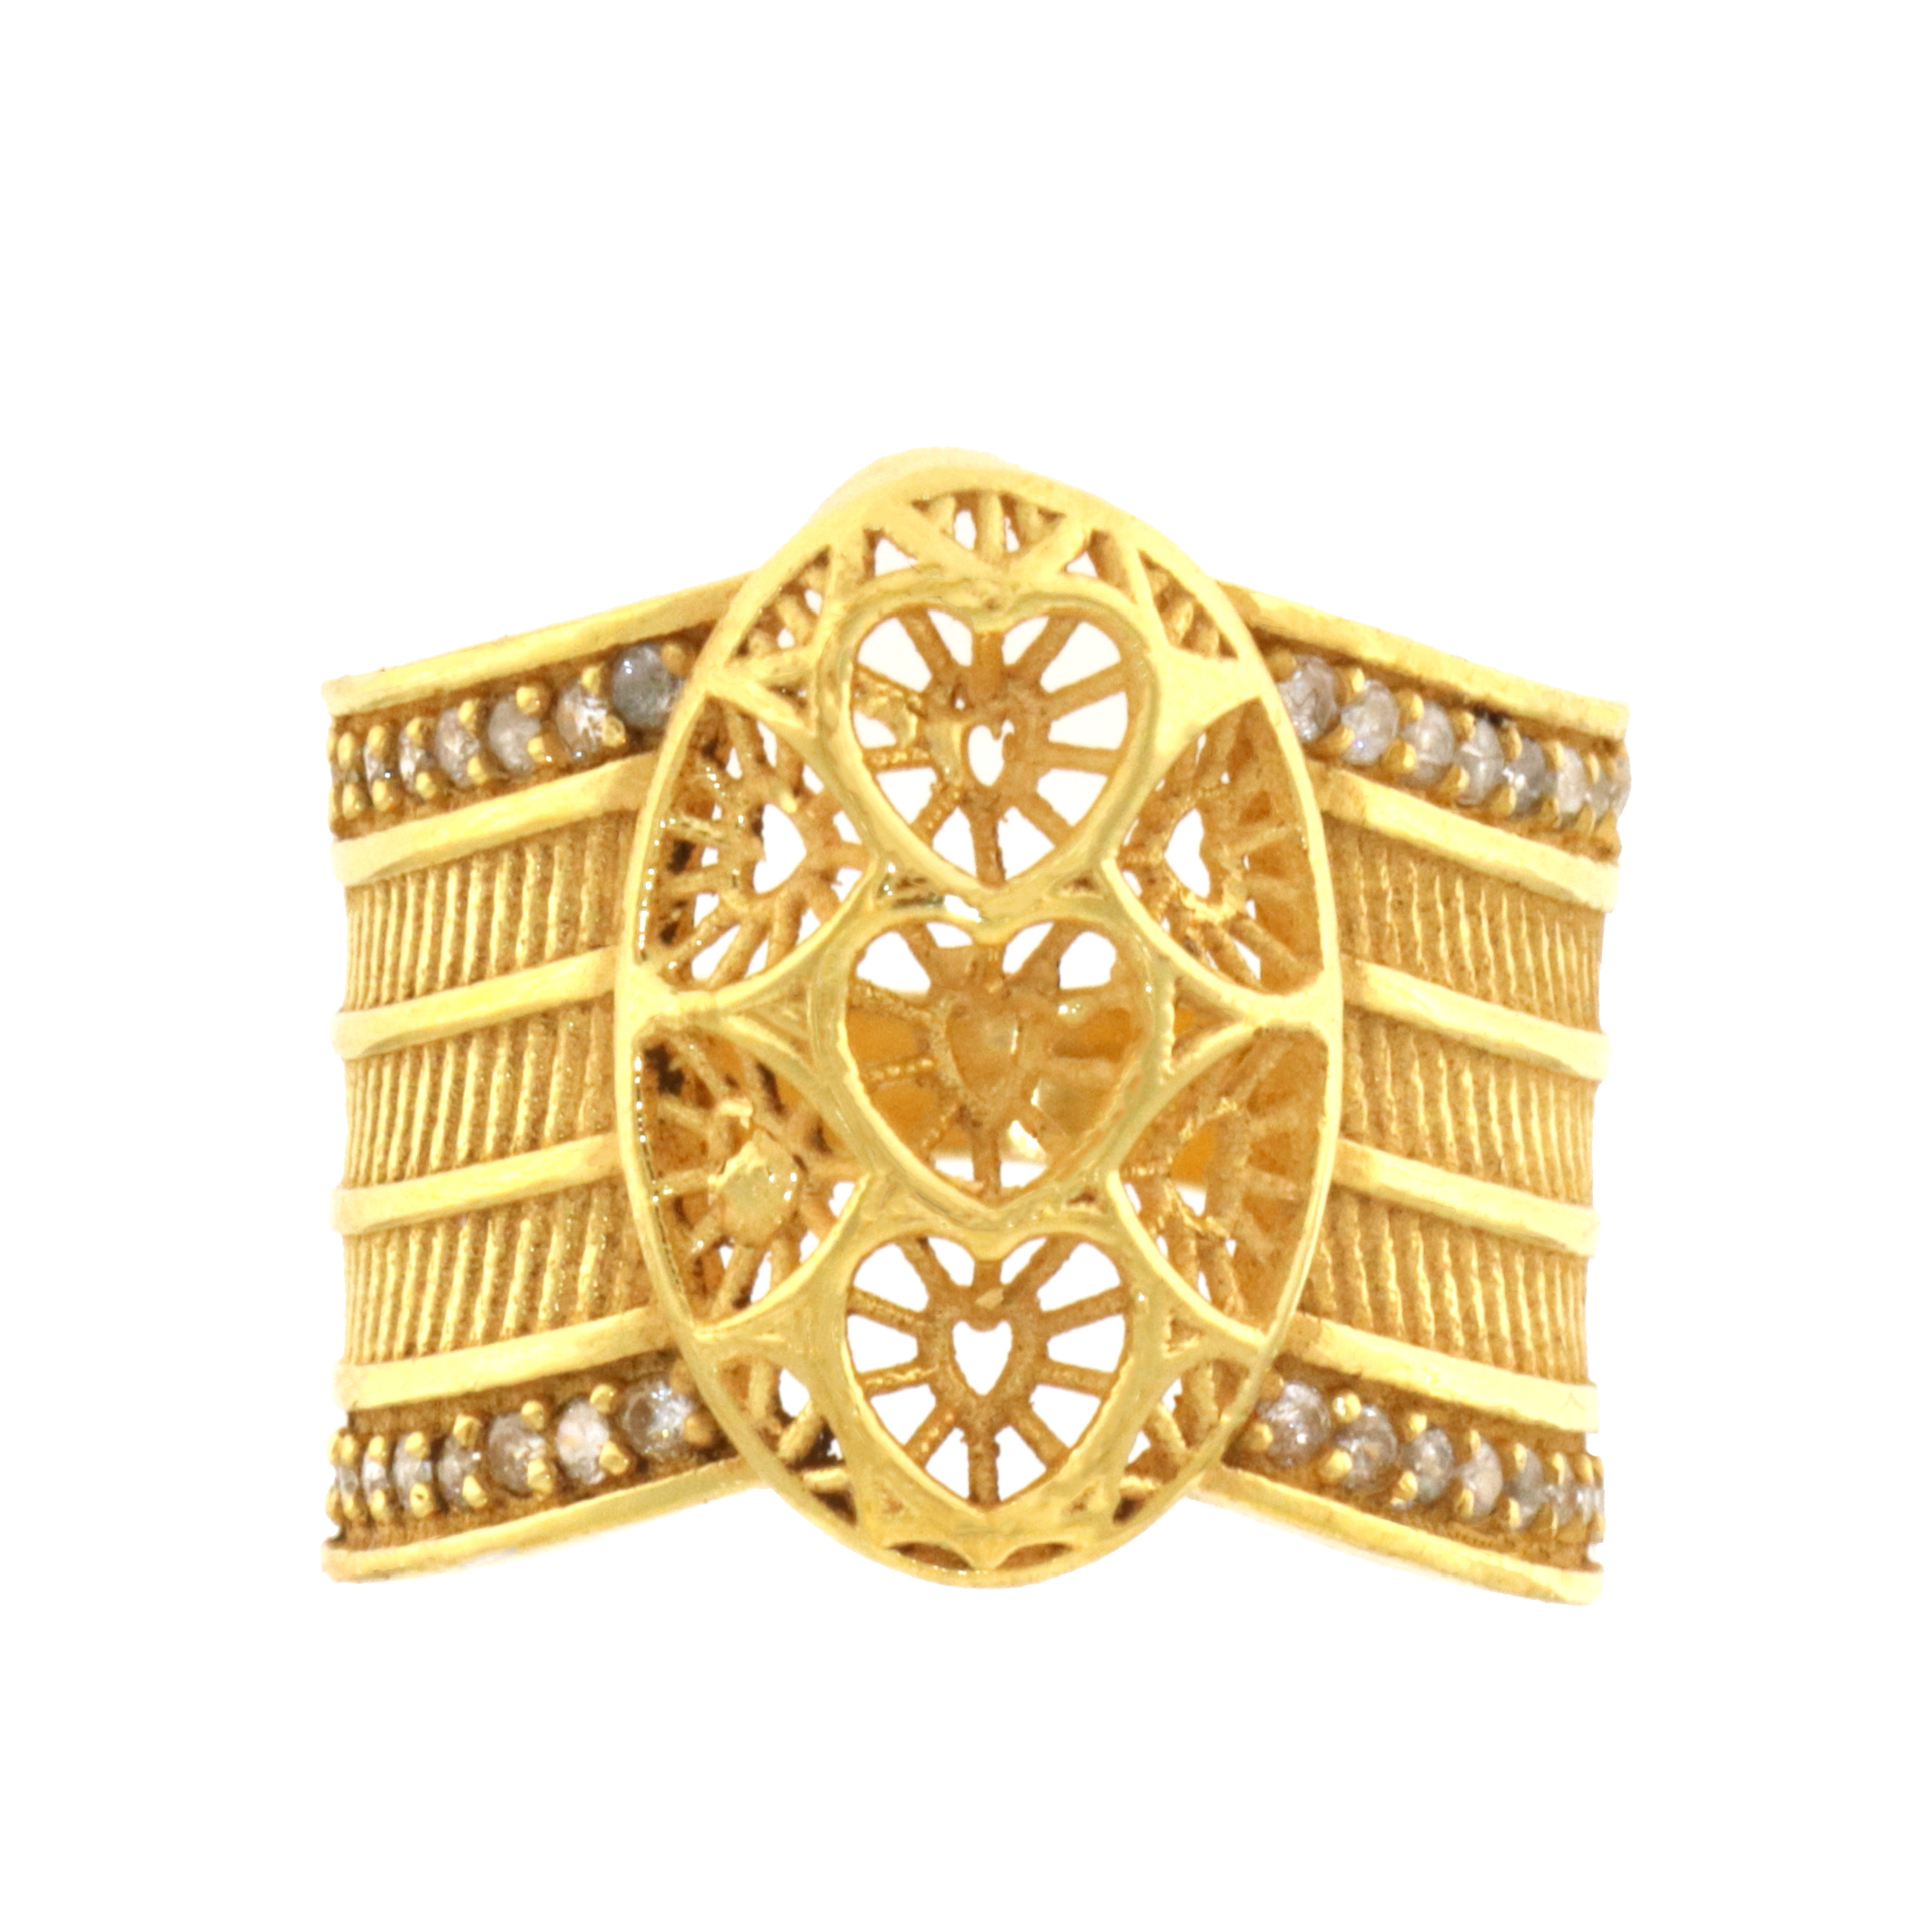 22ct Gold Heart Ring